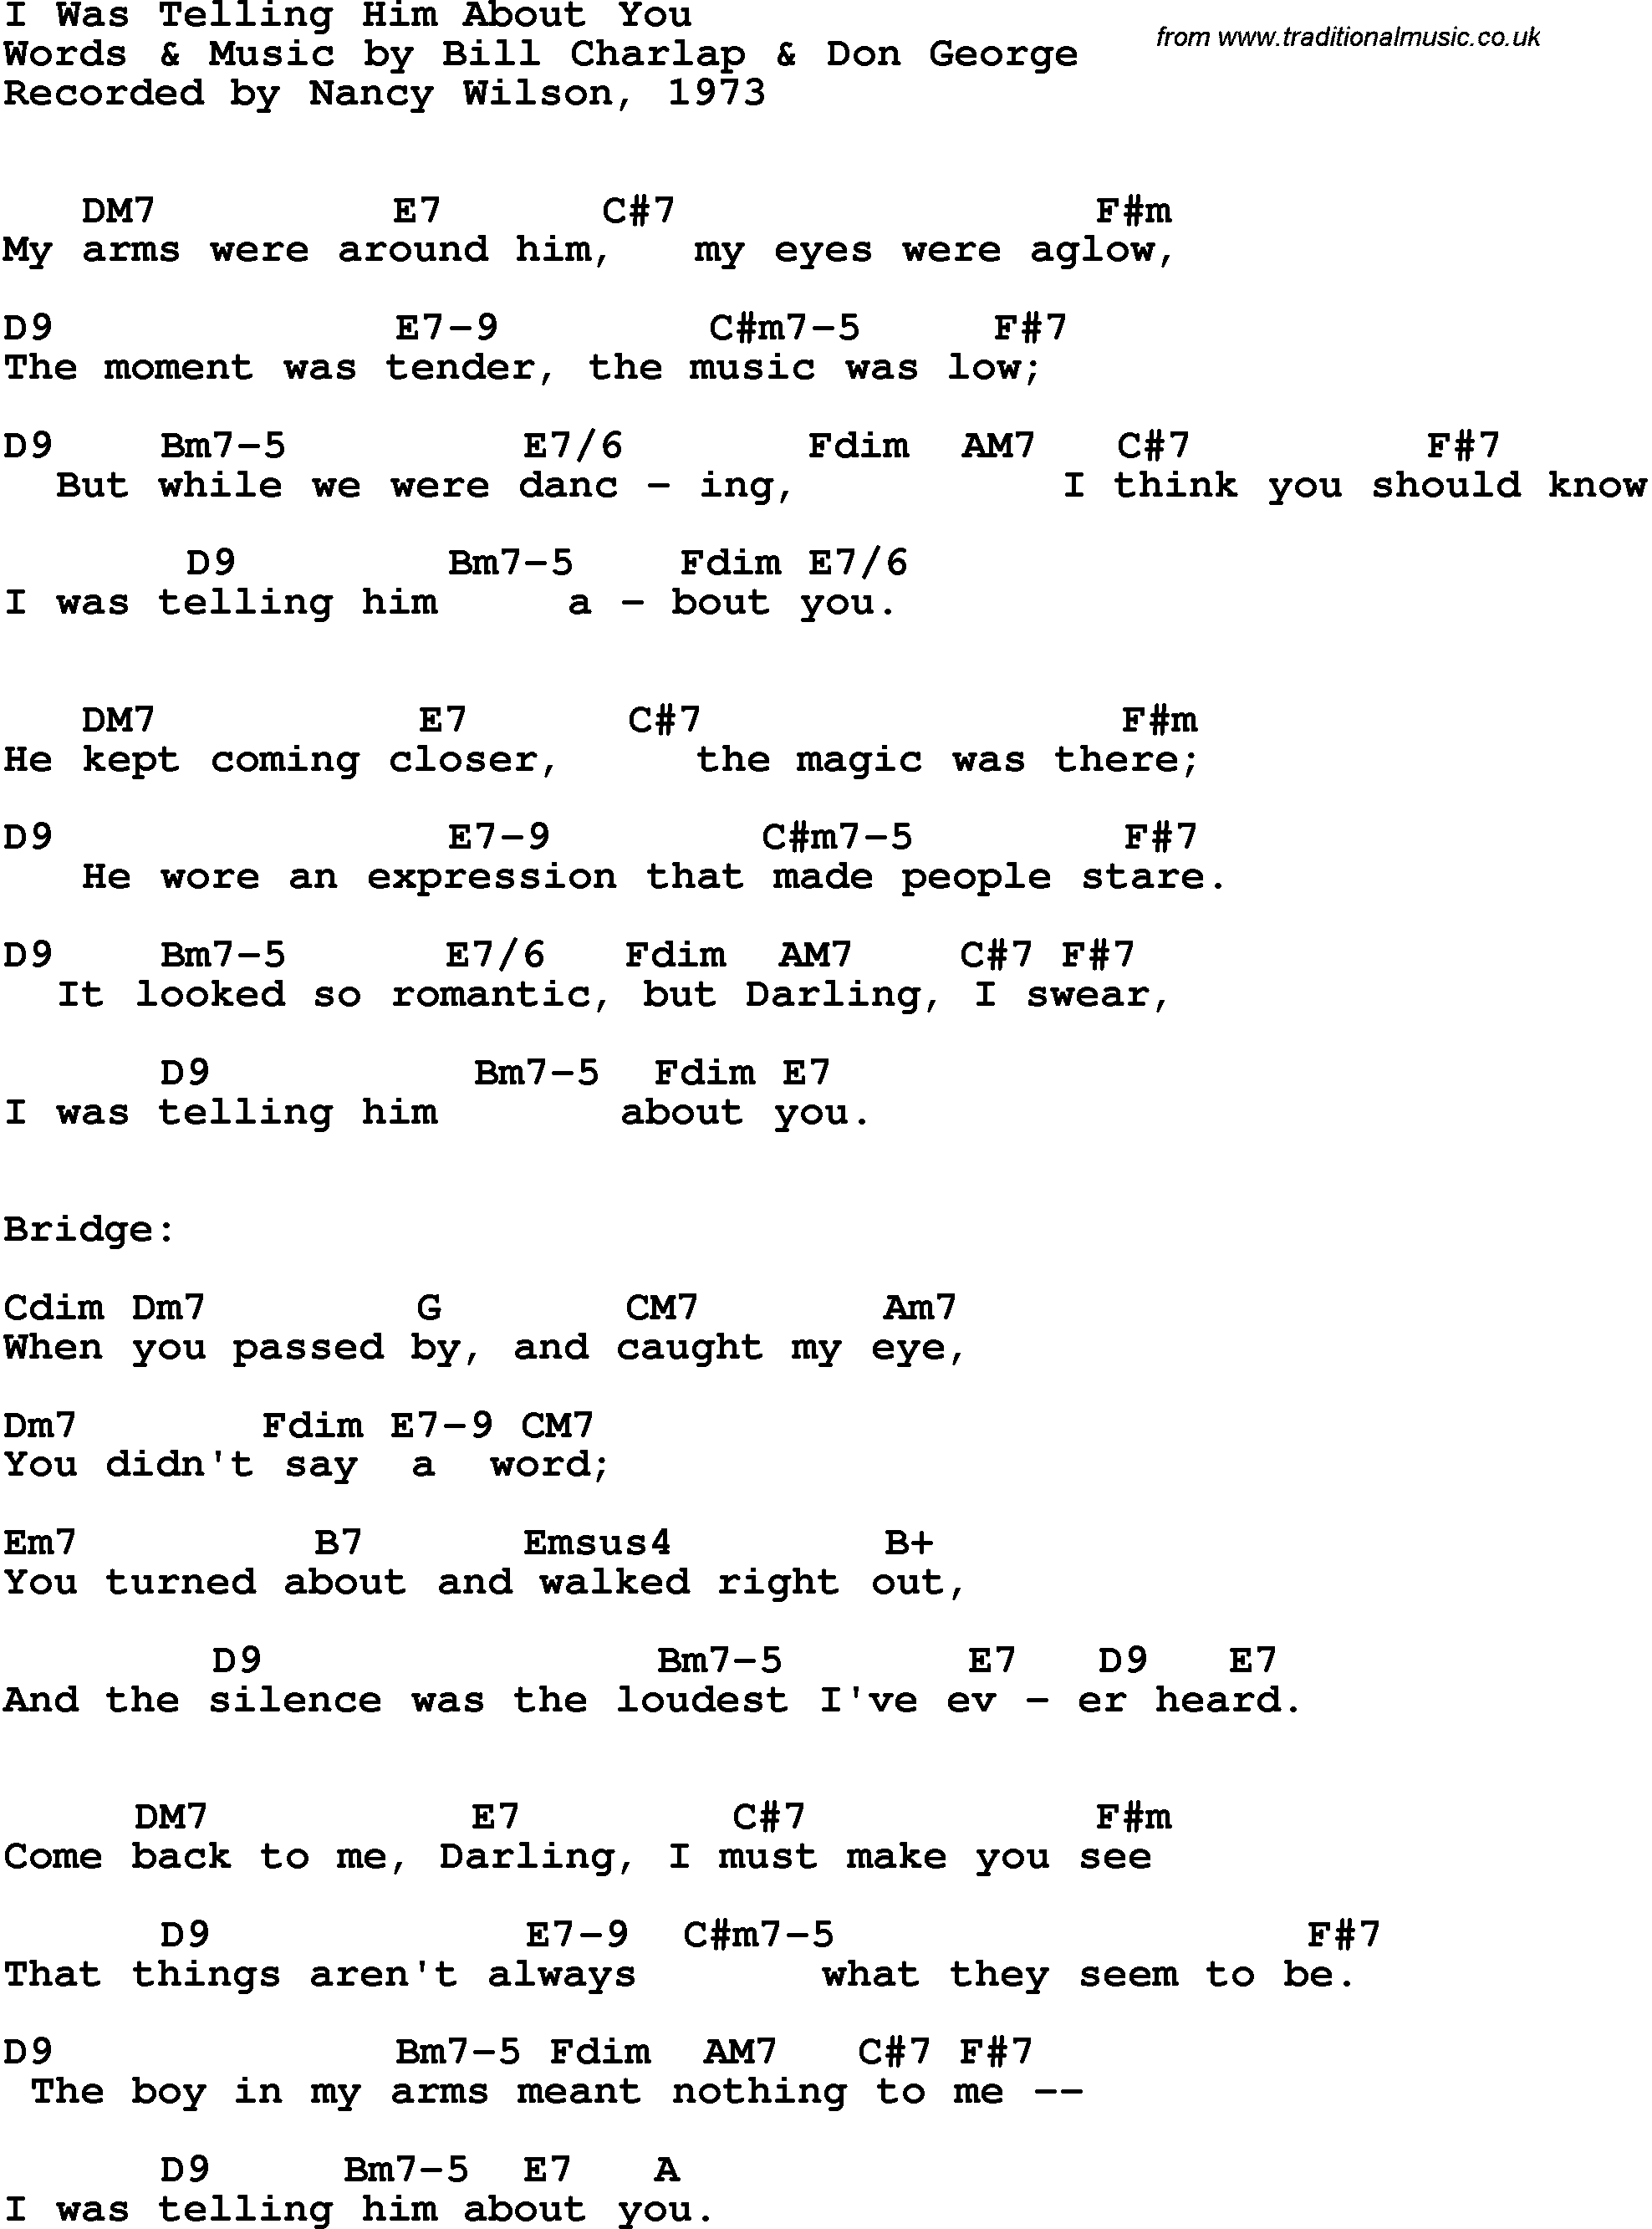 Song Lyrics with guitar chords for I Was Telling Him About You - Nancy Wilson, 1973